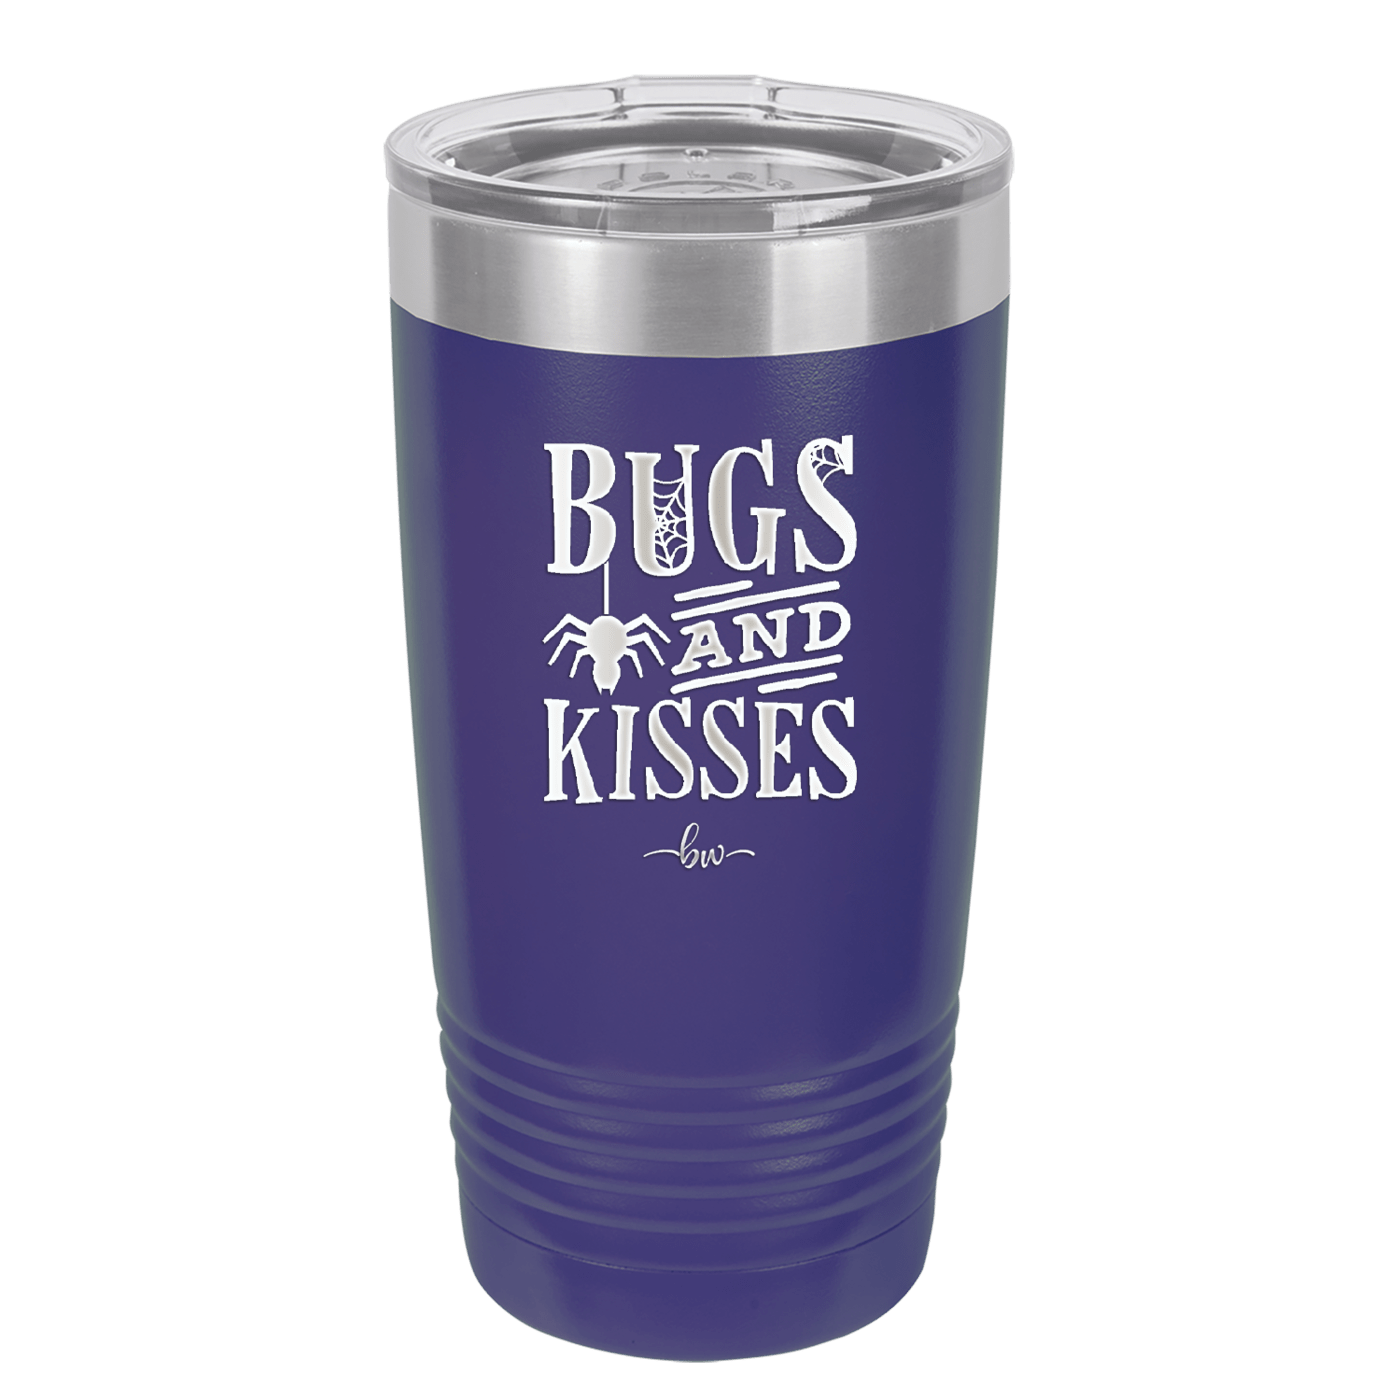 Bugs and Kisses - Laser Engraved Stainless Steel Drinkware - 1459-